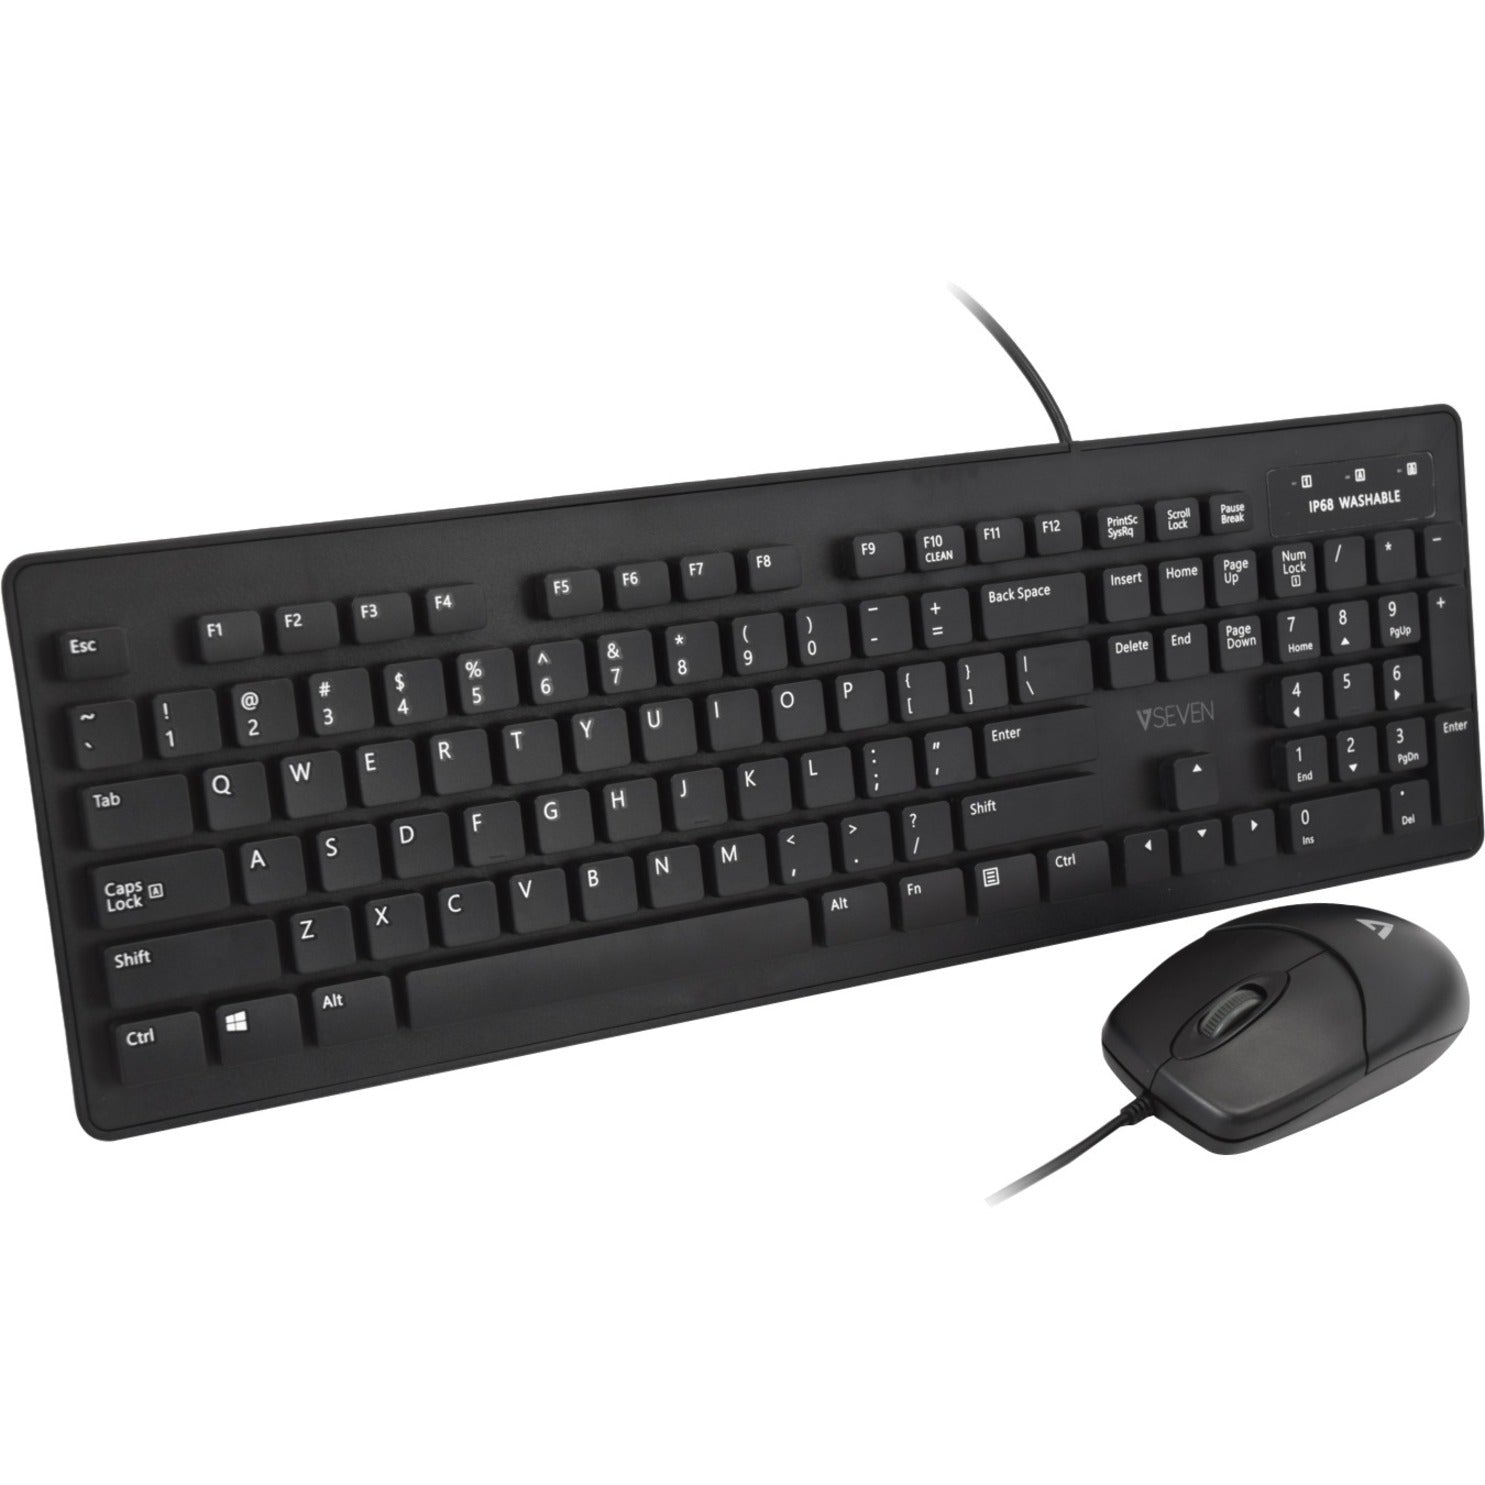 V7 CKU700US Washable Antimicrobial Keyboard & Mouse Combo, Water Proof, Dust Proof, USB Connectivity